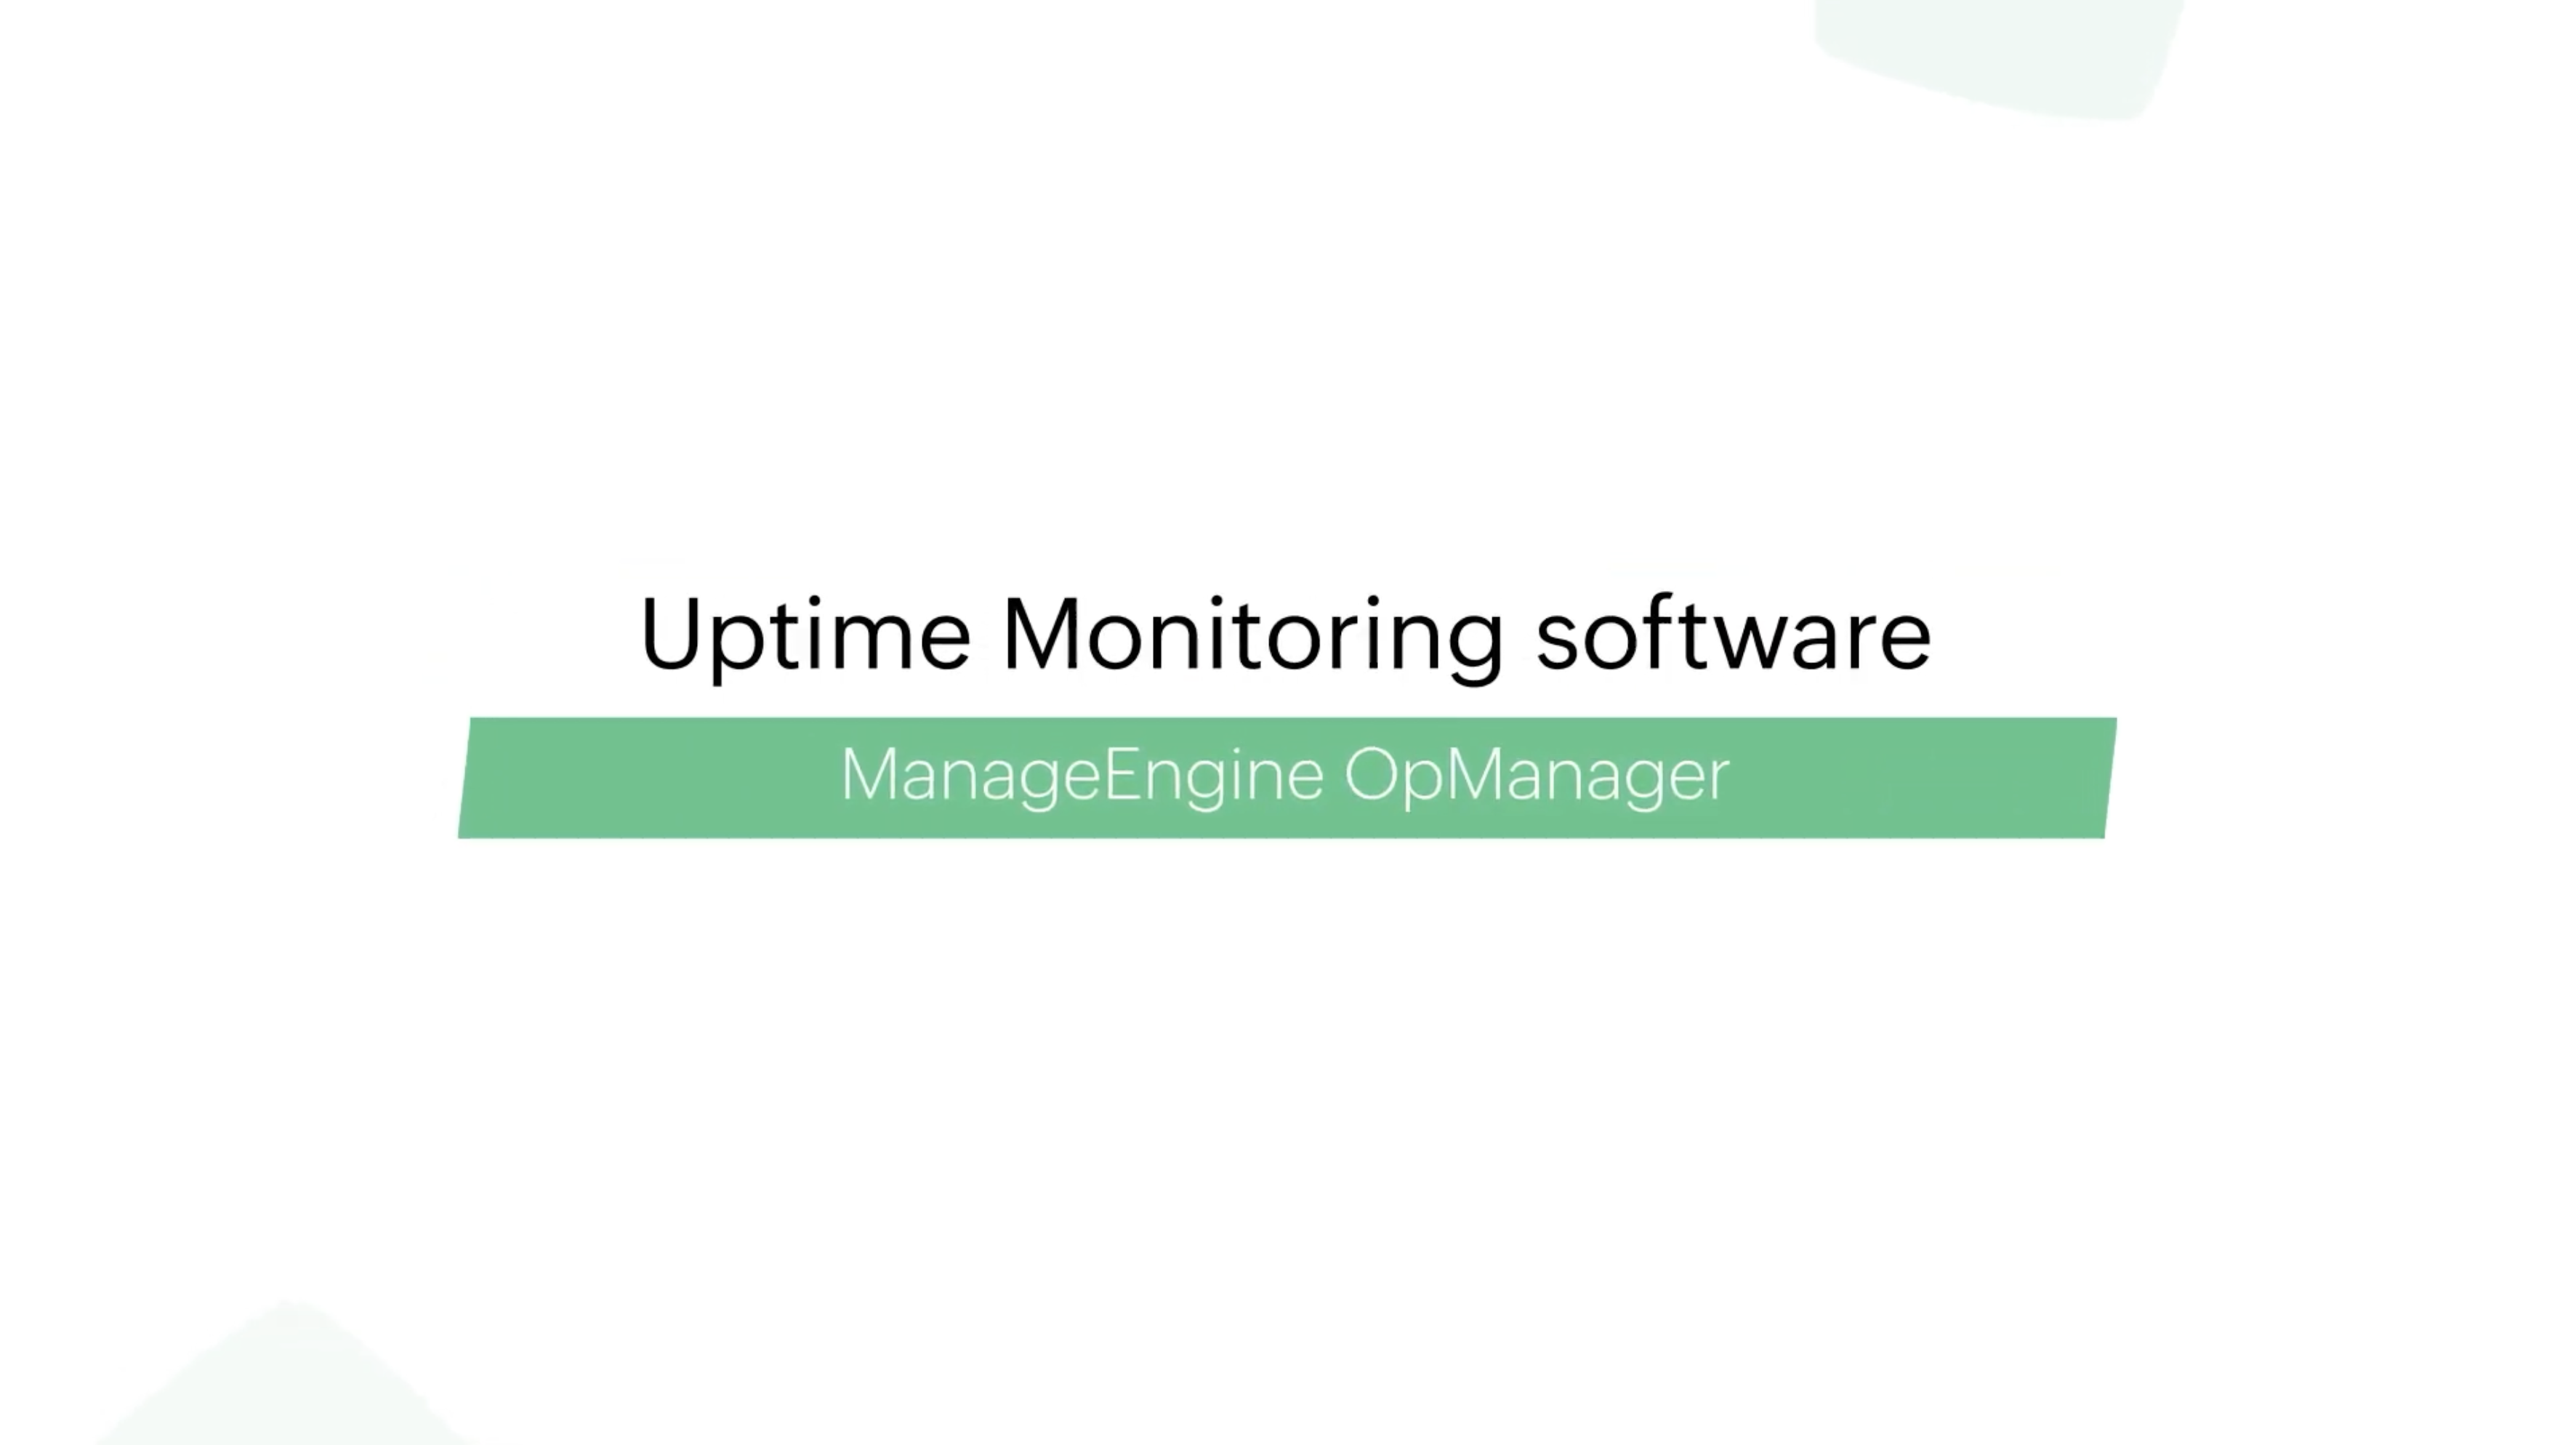 Network uptime monitor - ManageEngine OpManager